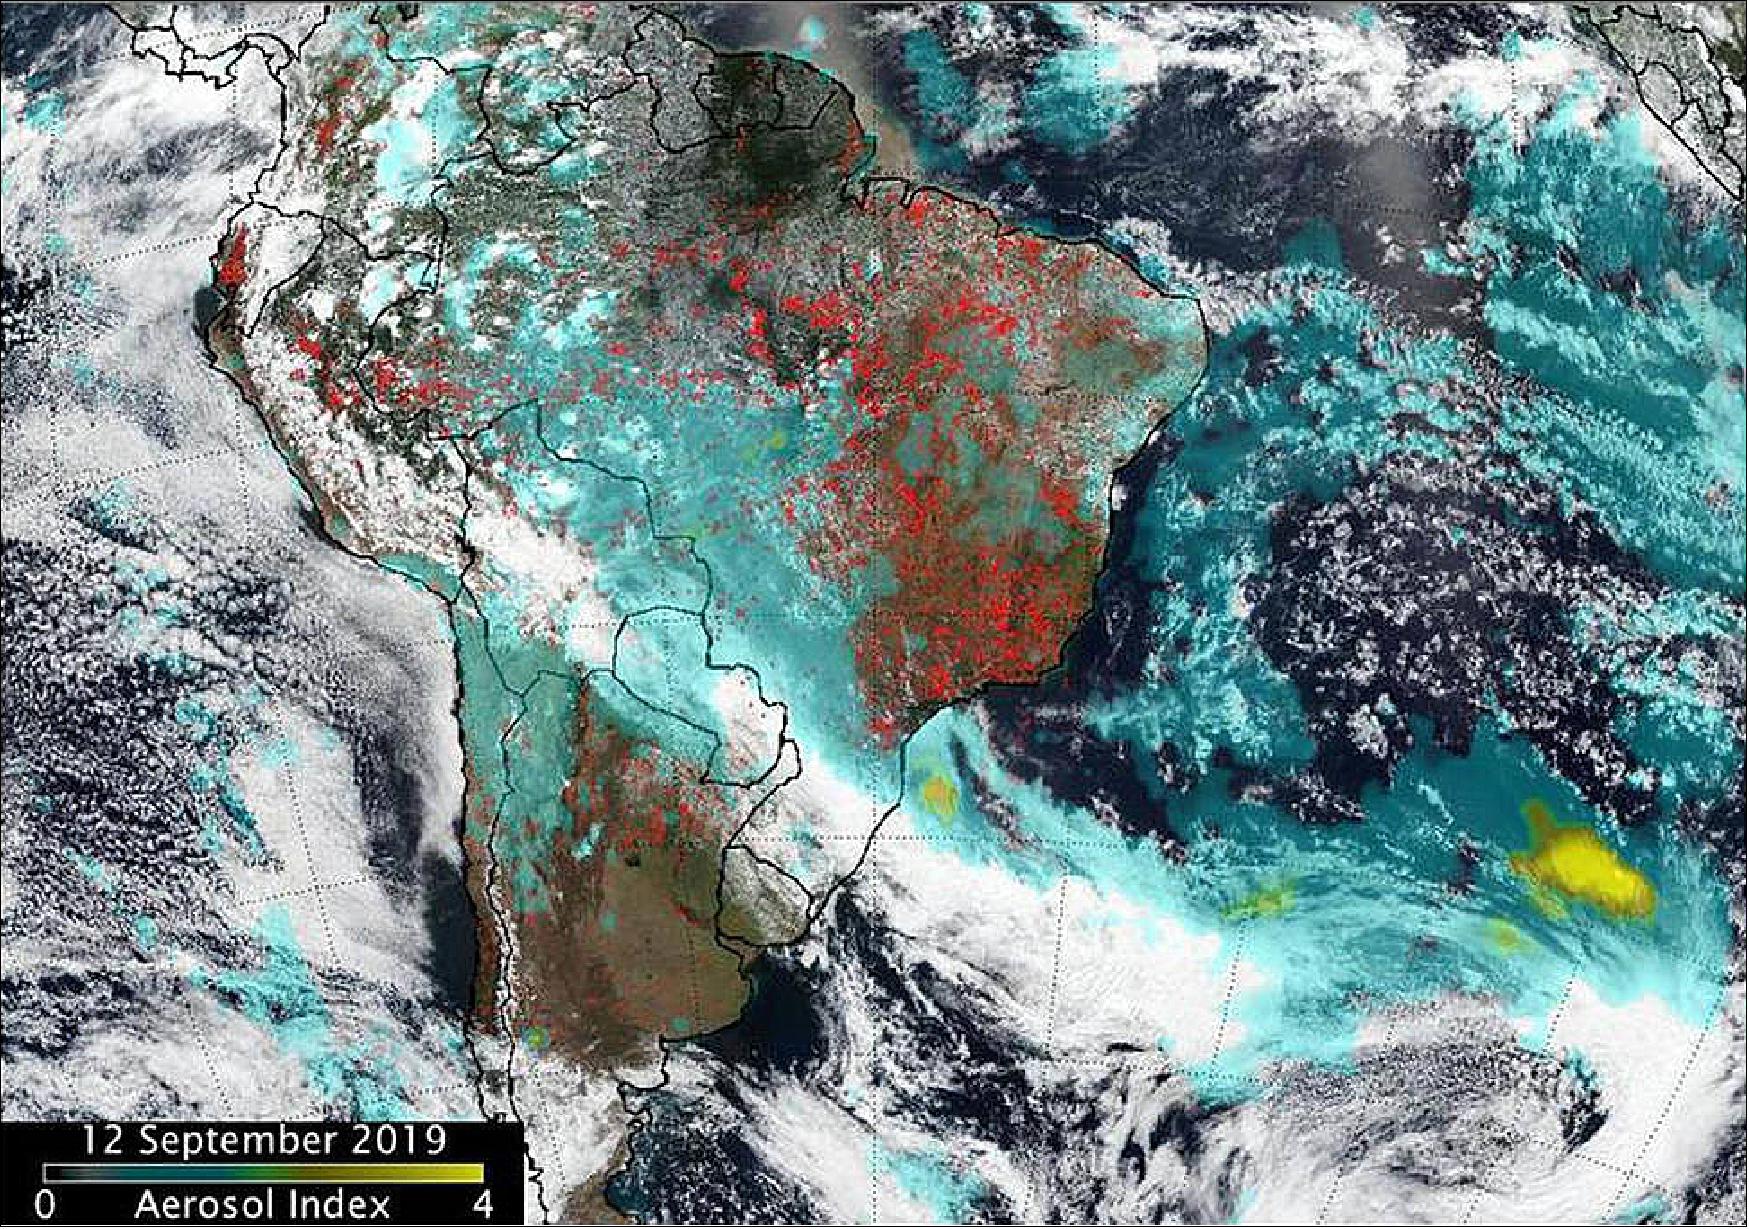 Figure 36: Fires in South America generated smoke that continues to create a long plume east into the Atlantic Ocean. Fires over western Brazil were generating aerosols at a level 2.0 on the index. Higher aerosol concentrations, as high as 4.0 were seen off the southeastern coast of Brazil as a result of the fires in the region (image credit: NASA/NOAA, Colin Seftor)